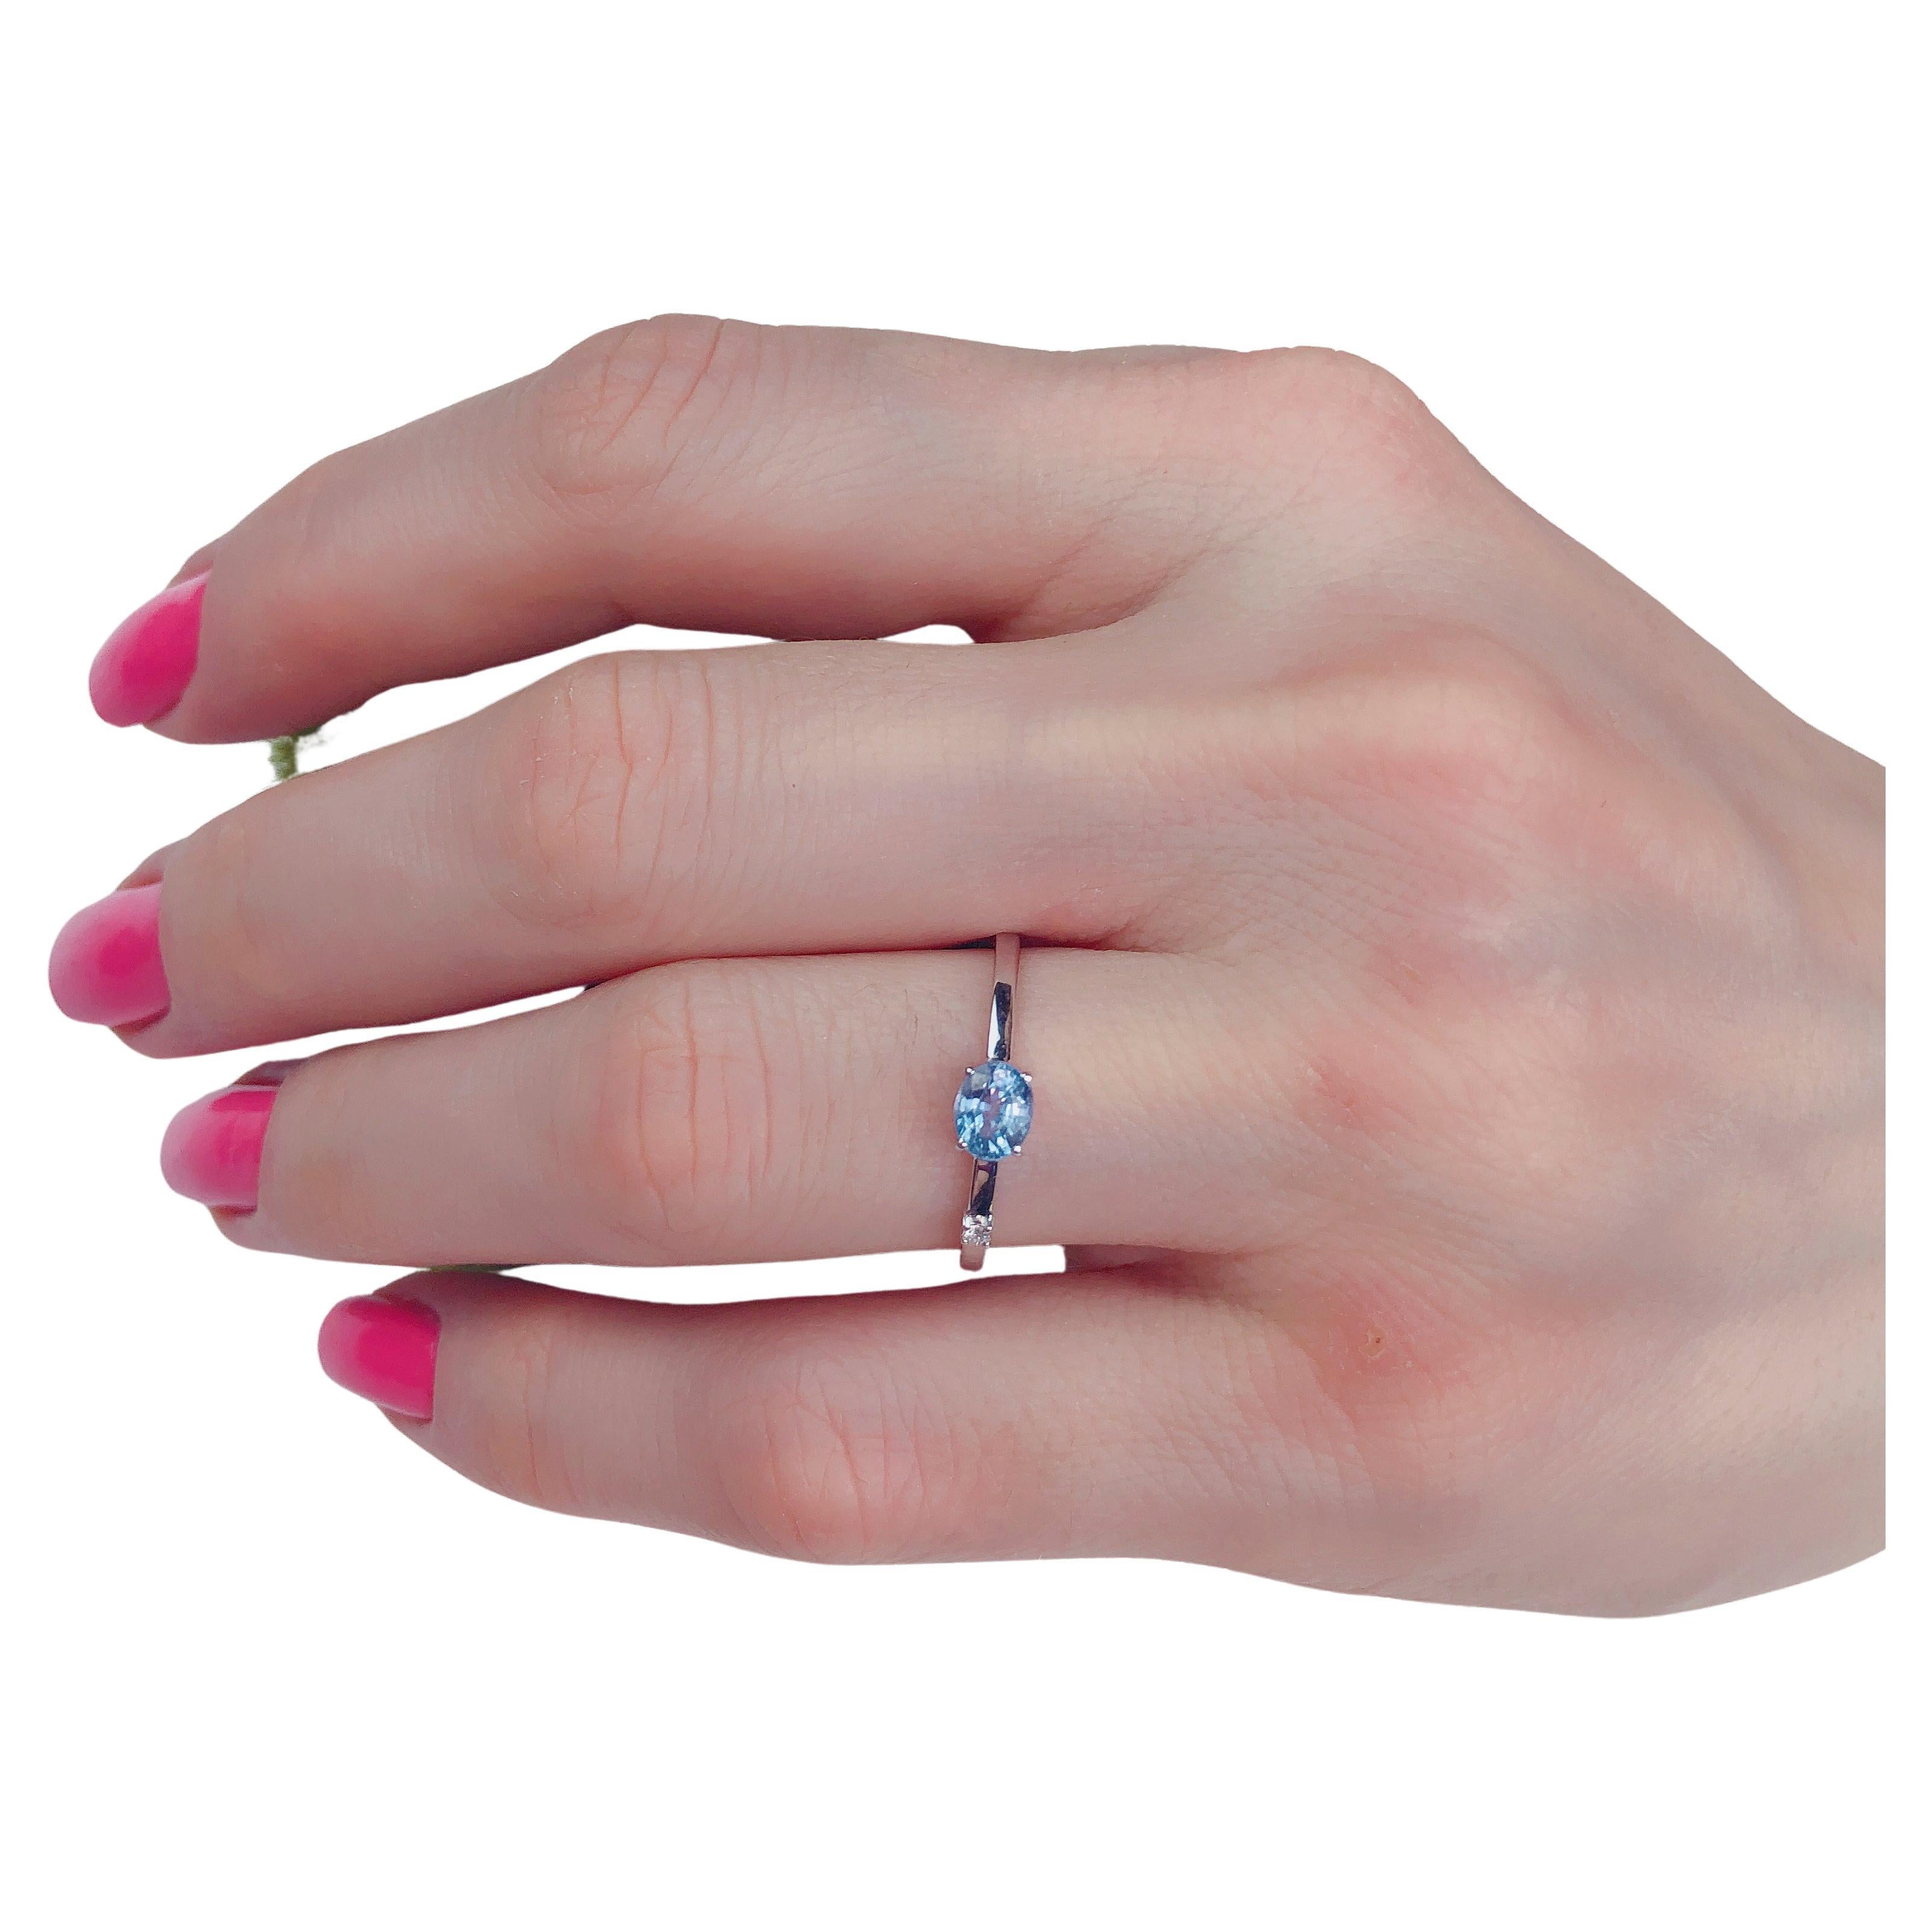 Blue sapphire stackable ring.  For Sale